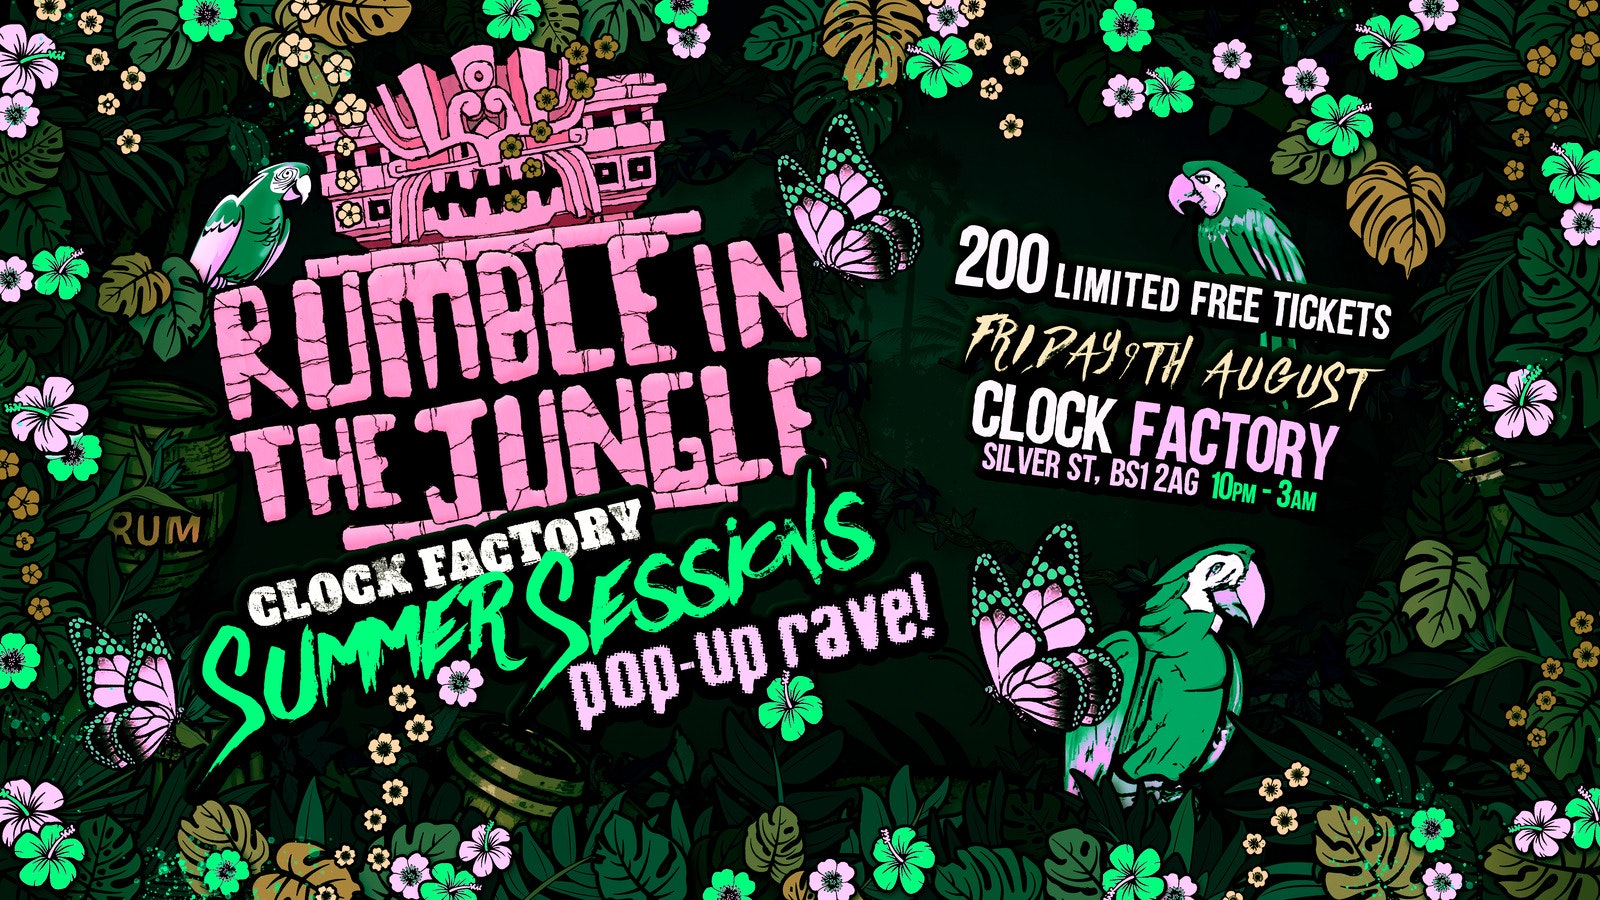 Rumble In The Jungle – Summer Sessions: FREE Pop-Up Rave